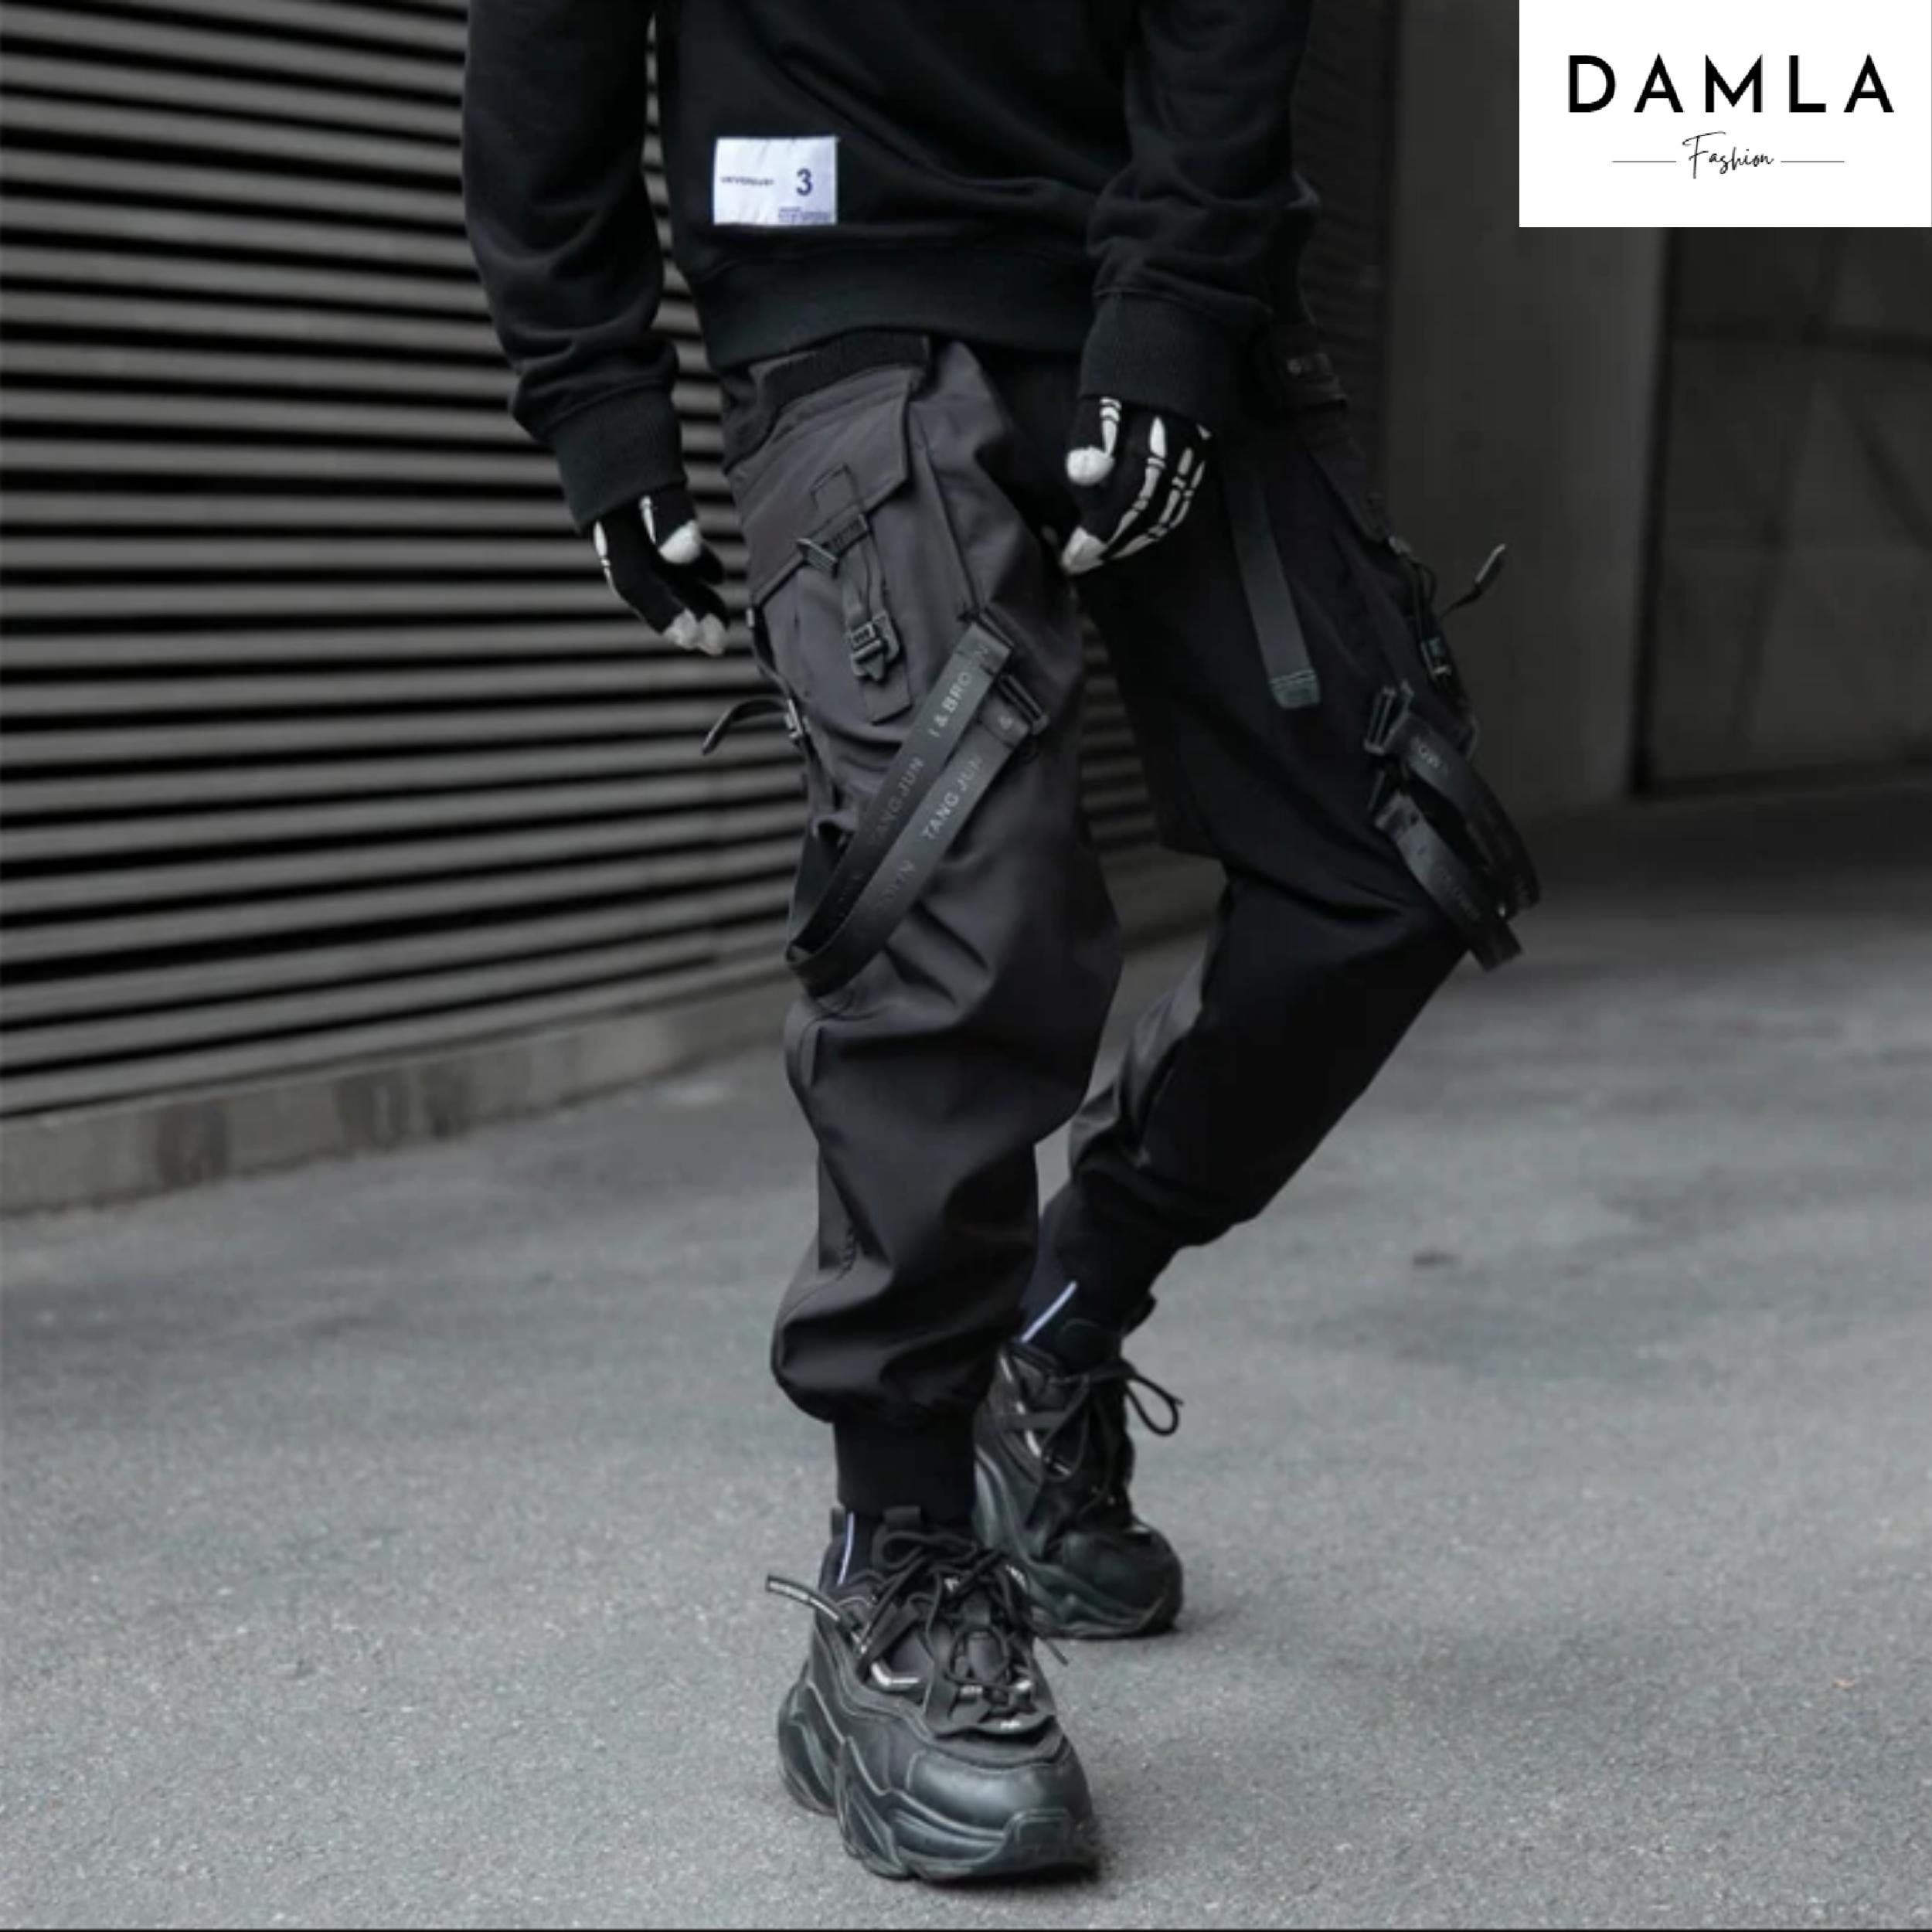 Streetwear Style Tips How to Style Cargo Pants  Standout